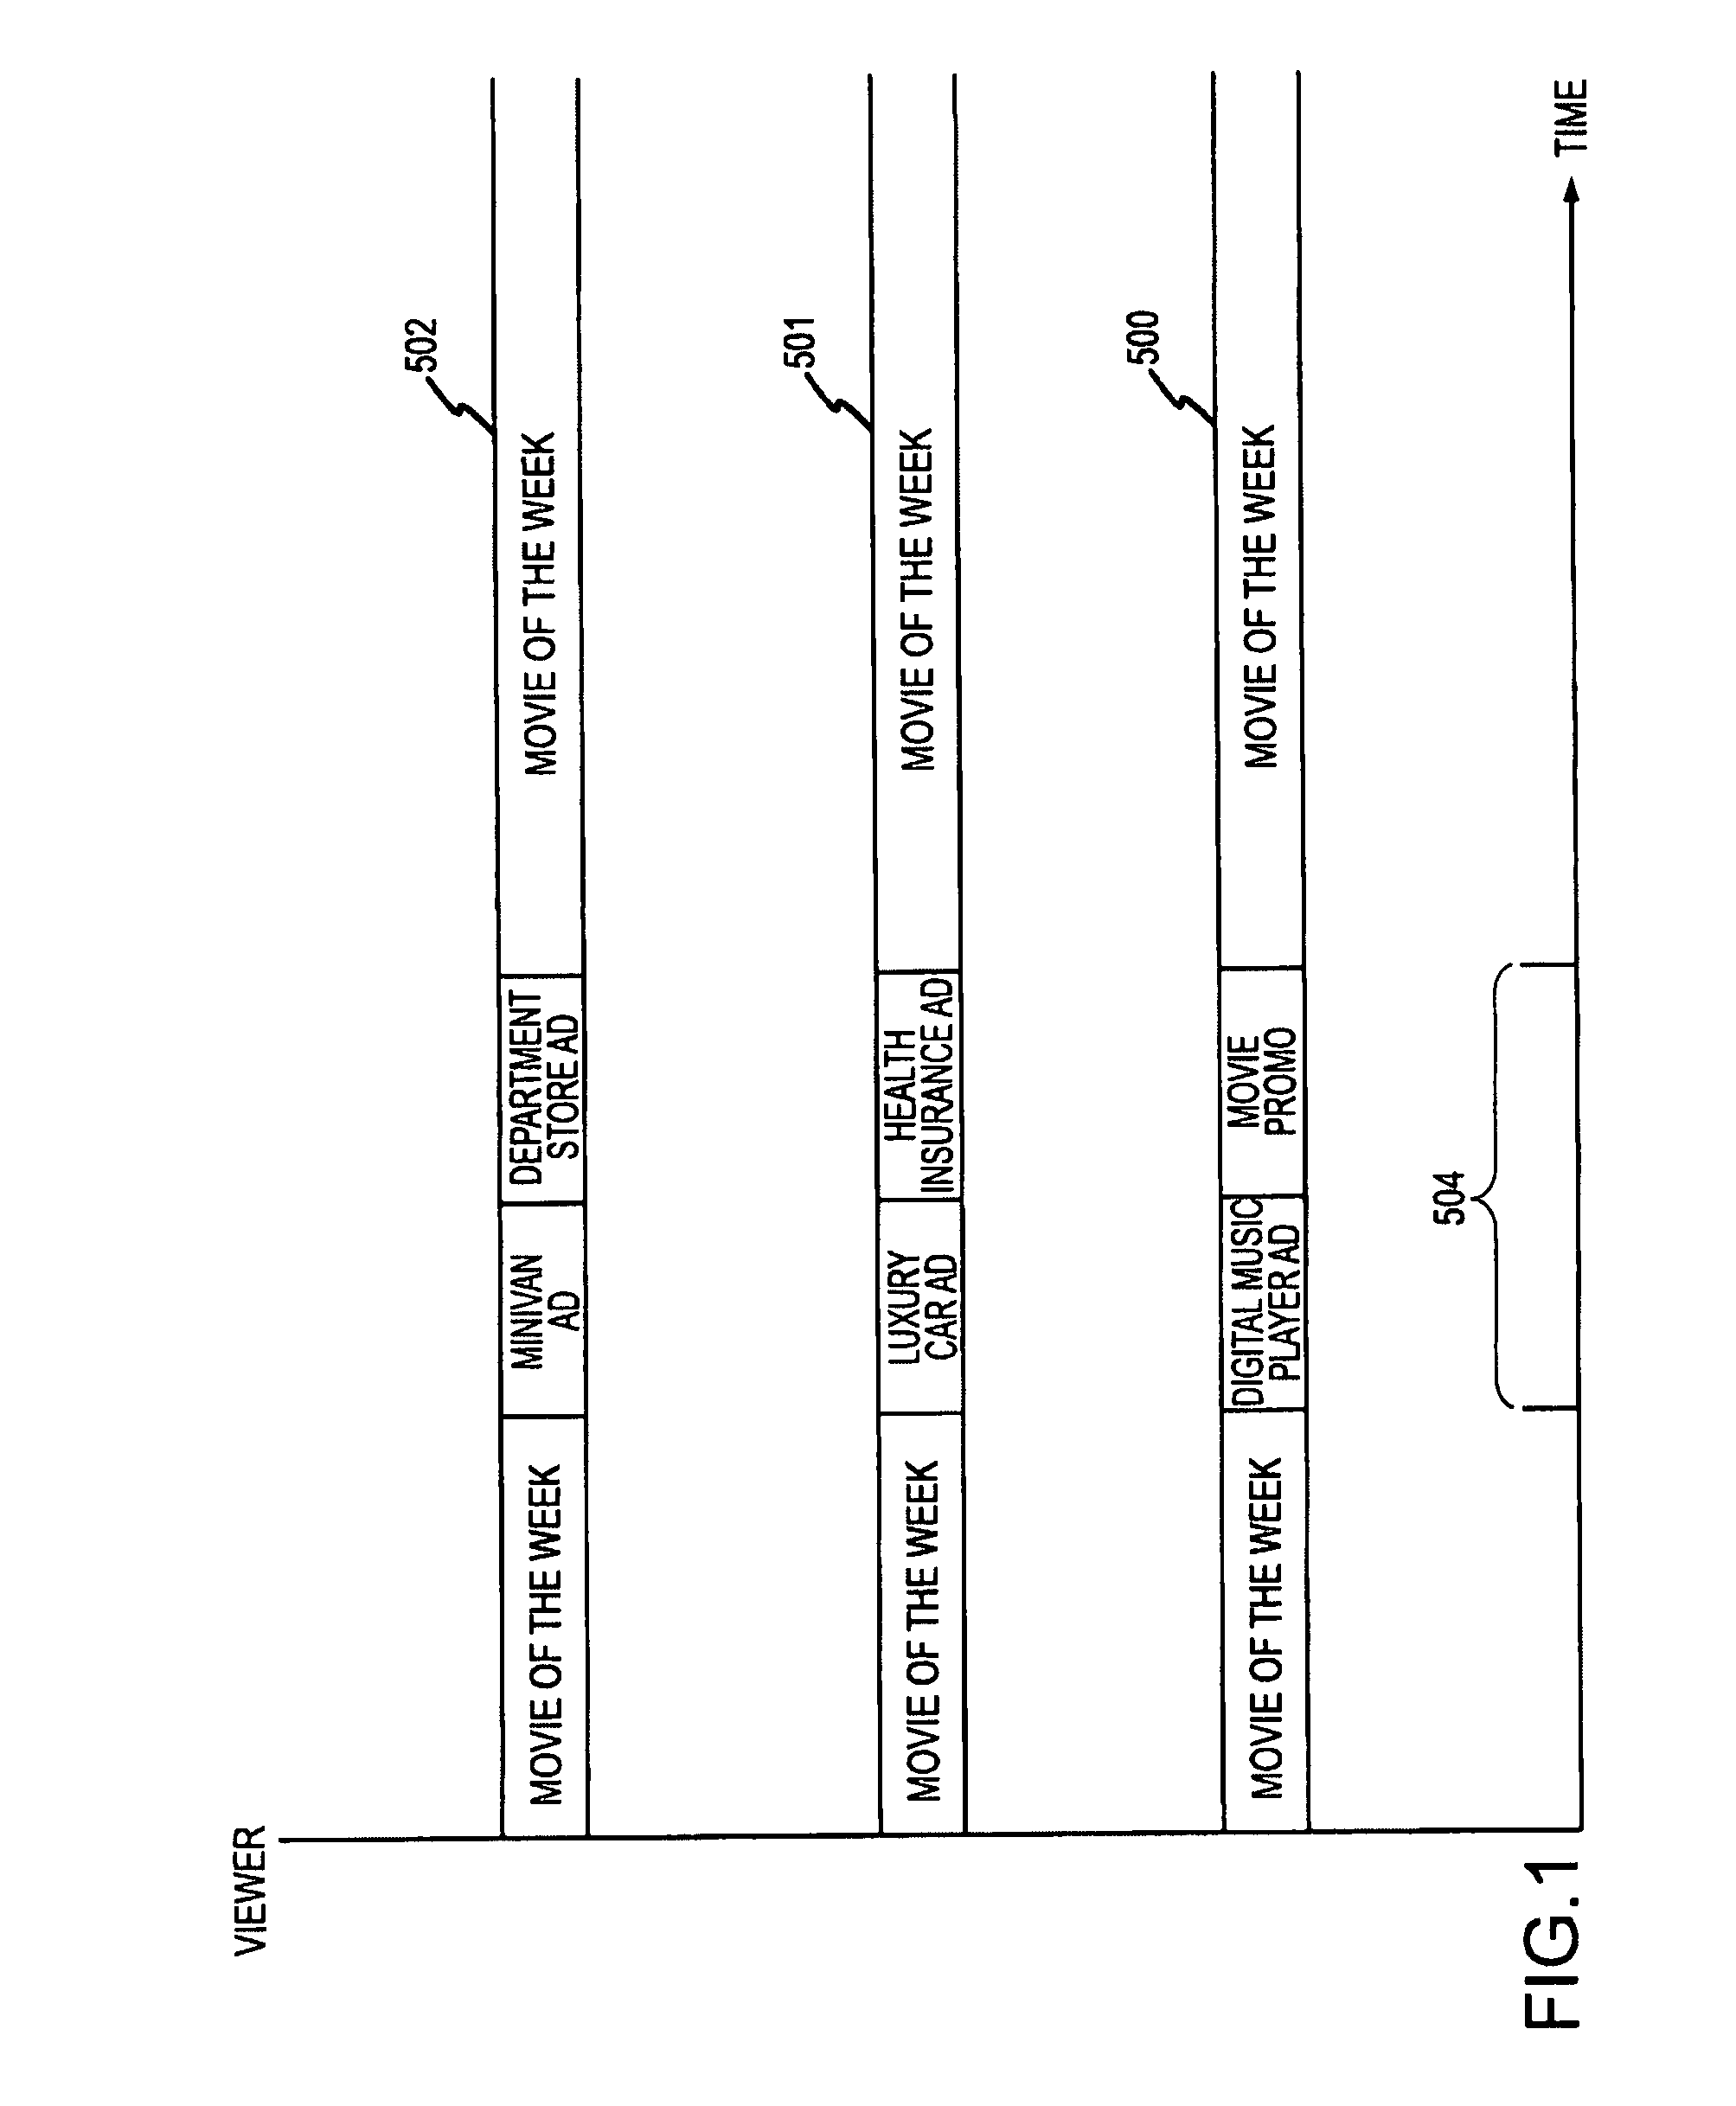 Fuzzy logic based viewer identification for targeted asset delivery system